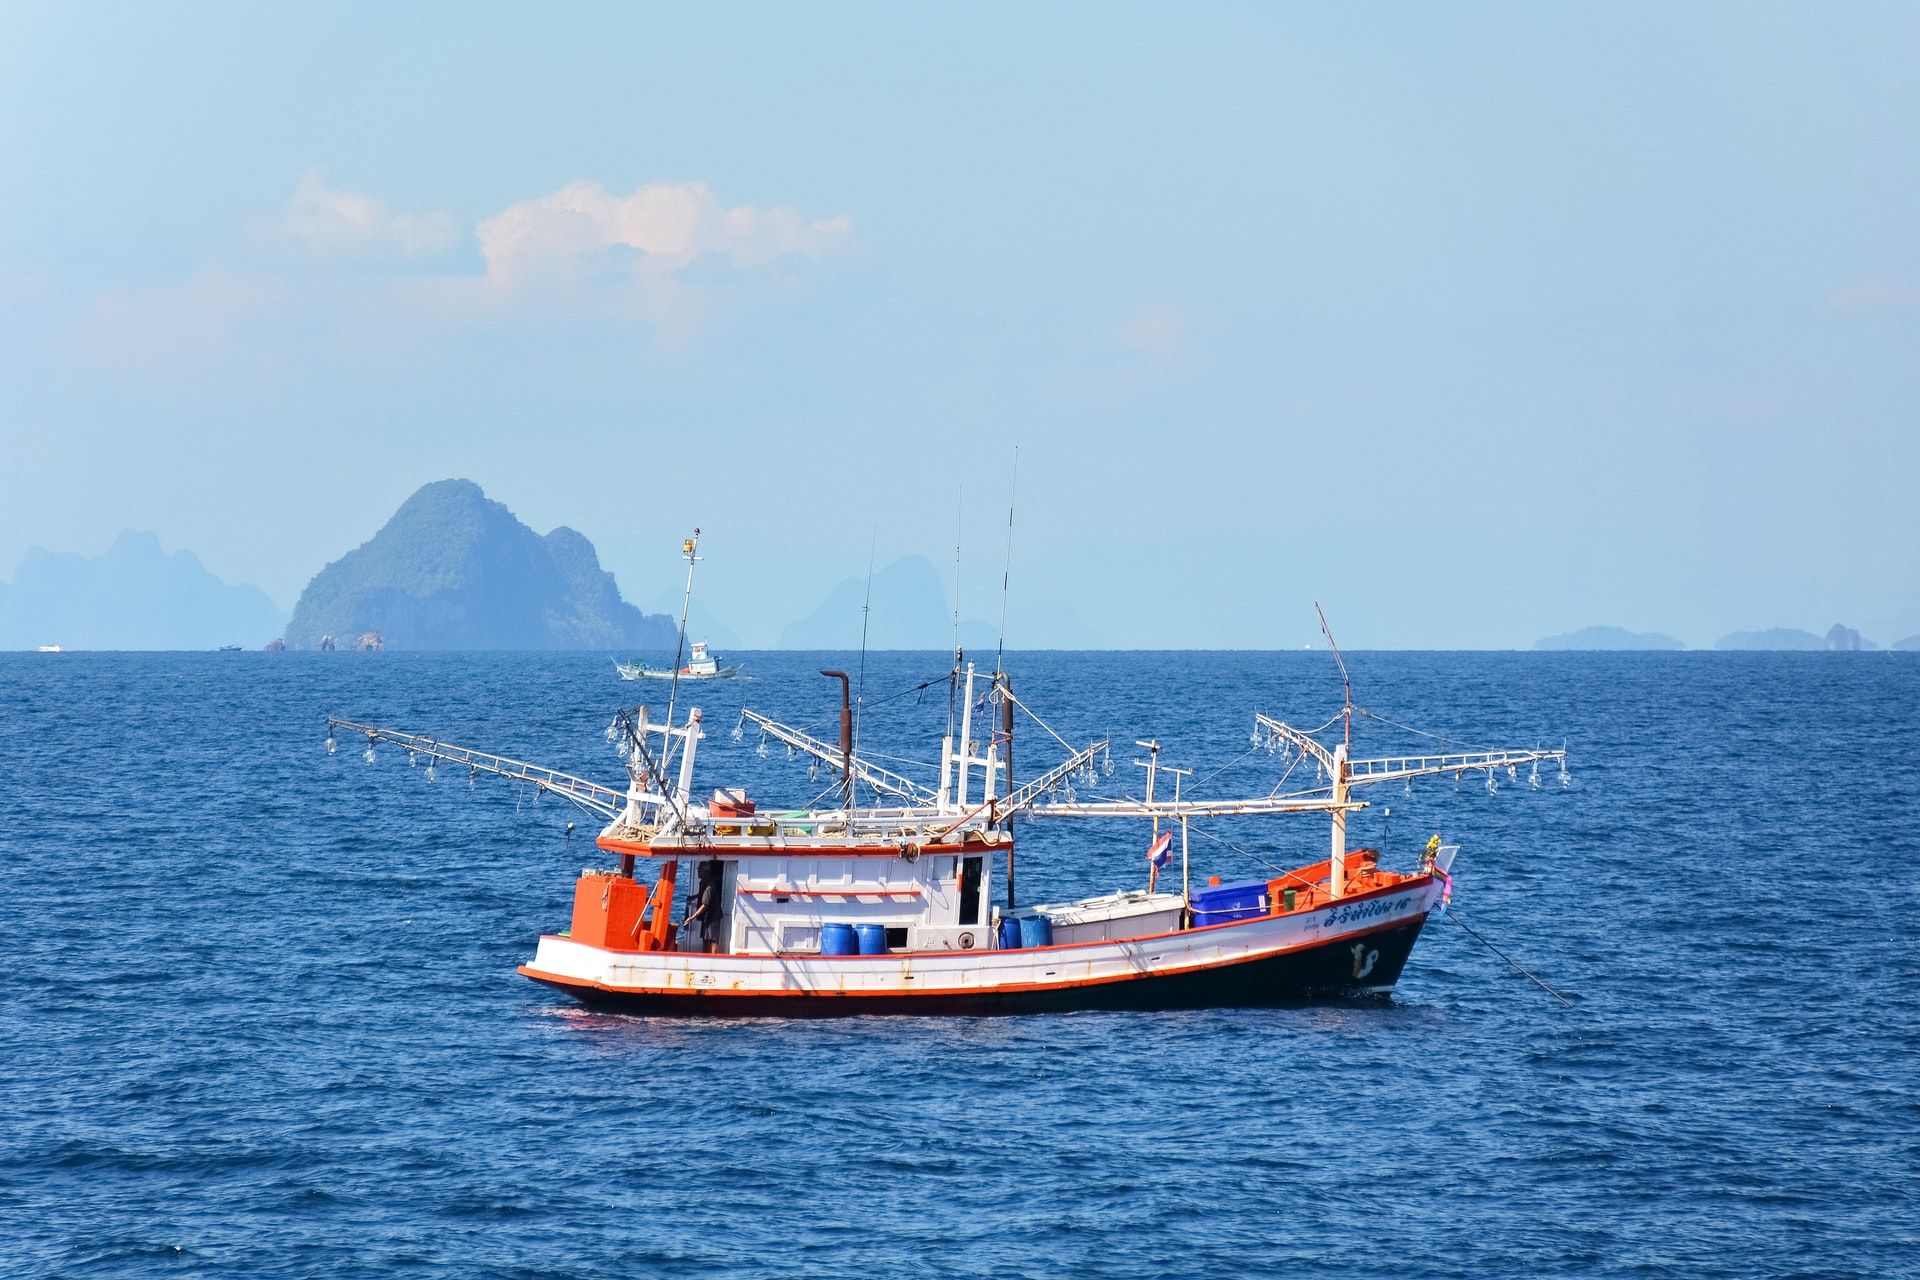 Fishing vessel with islands in the background